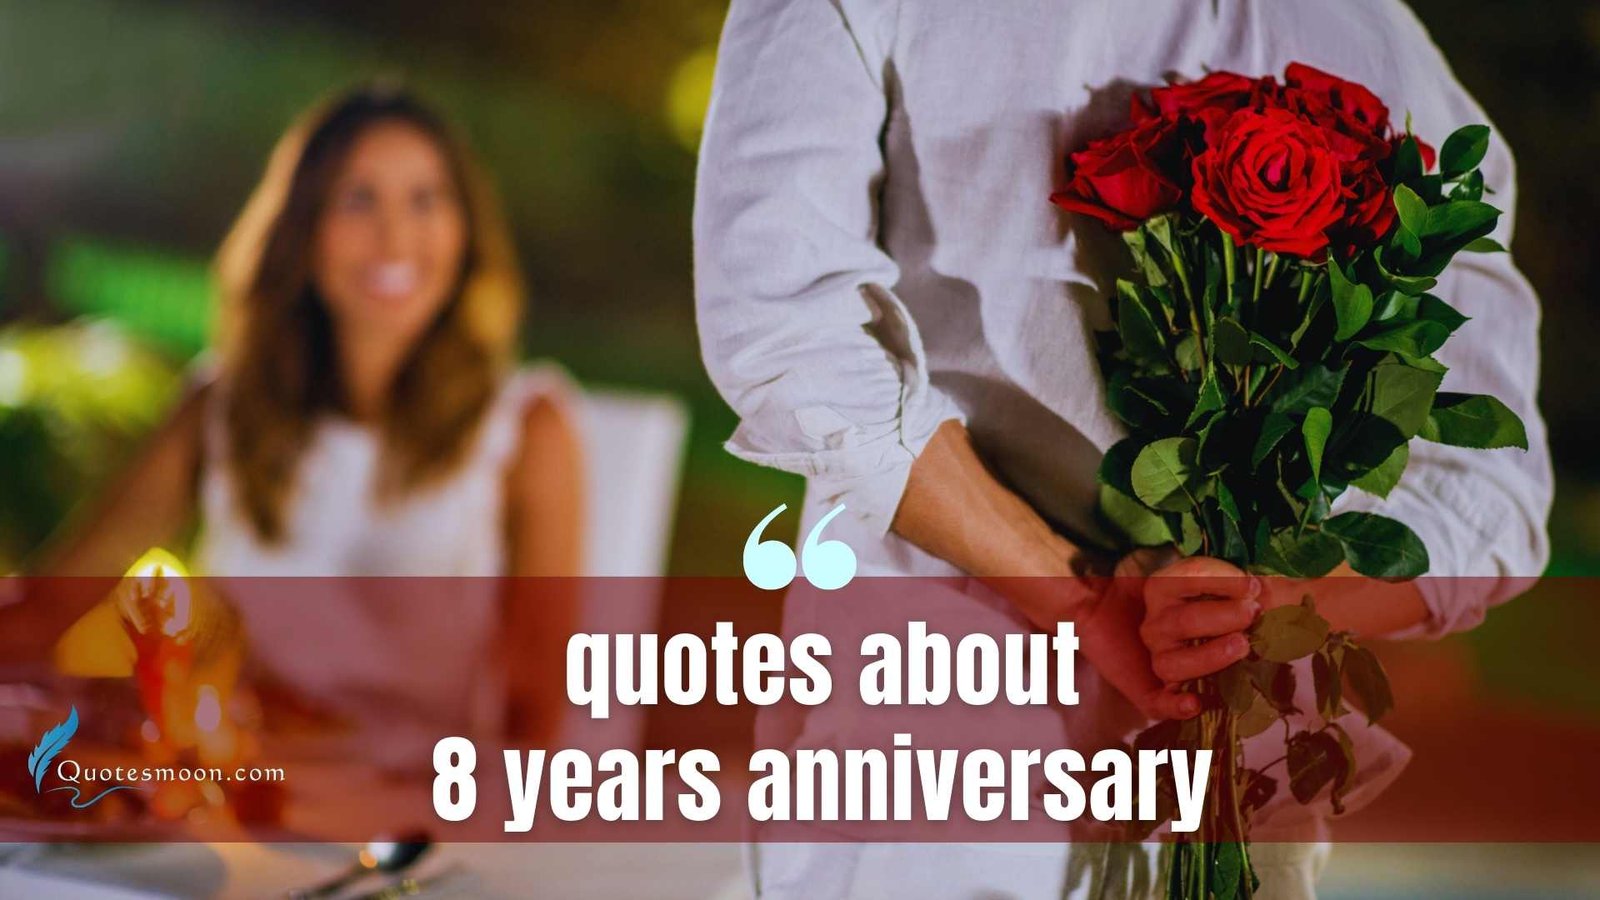 Quotes About 8 Years Anniversary